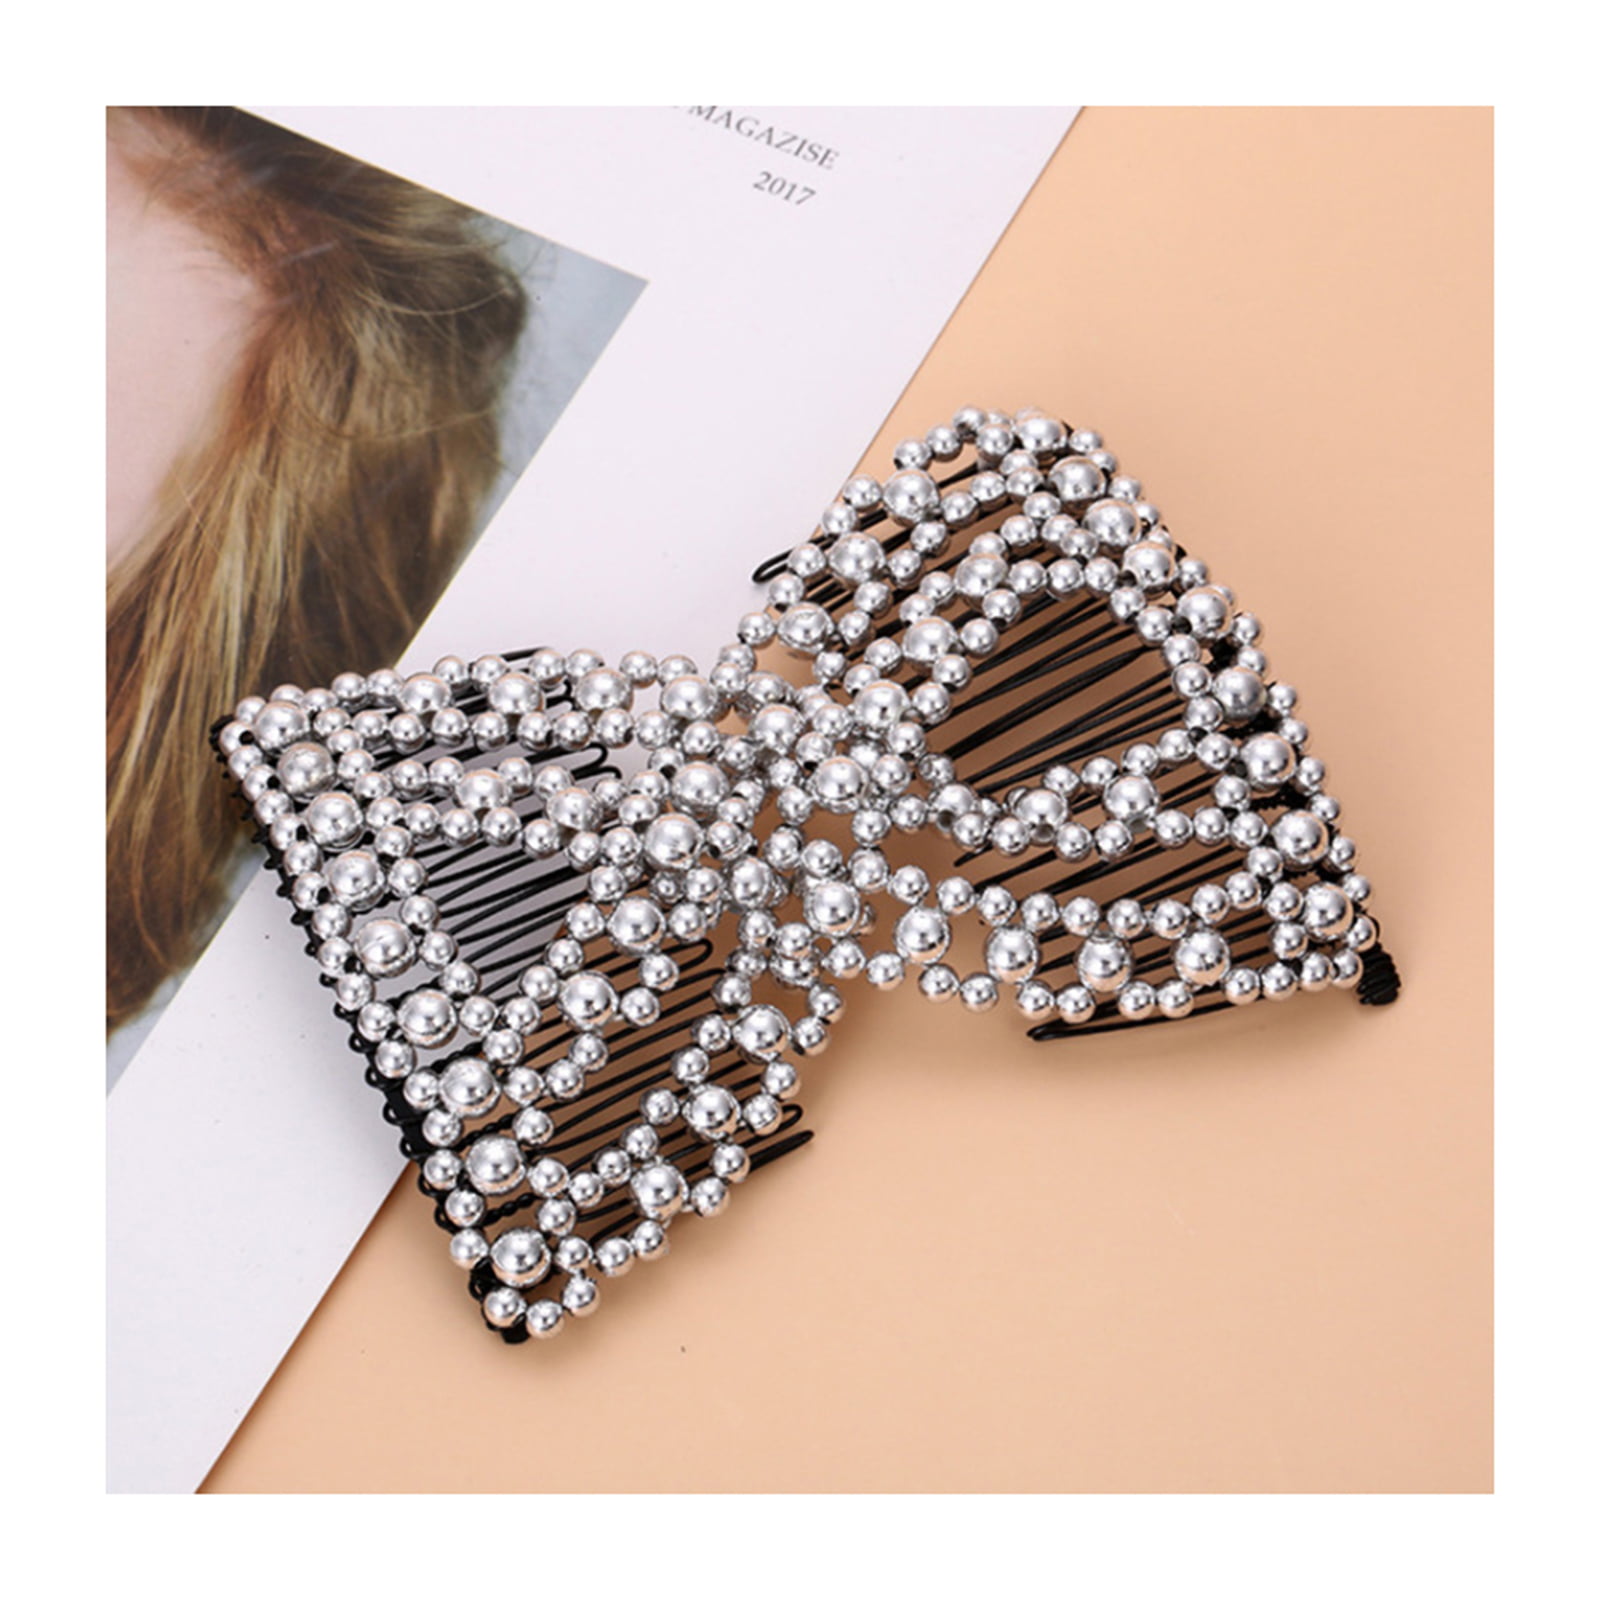 Flexible Butterfly Hair Clip Electroplating Beads Hair Comb for Bun Hair  Double Stretching Comb with 20 Teeth | Walmart Canada